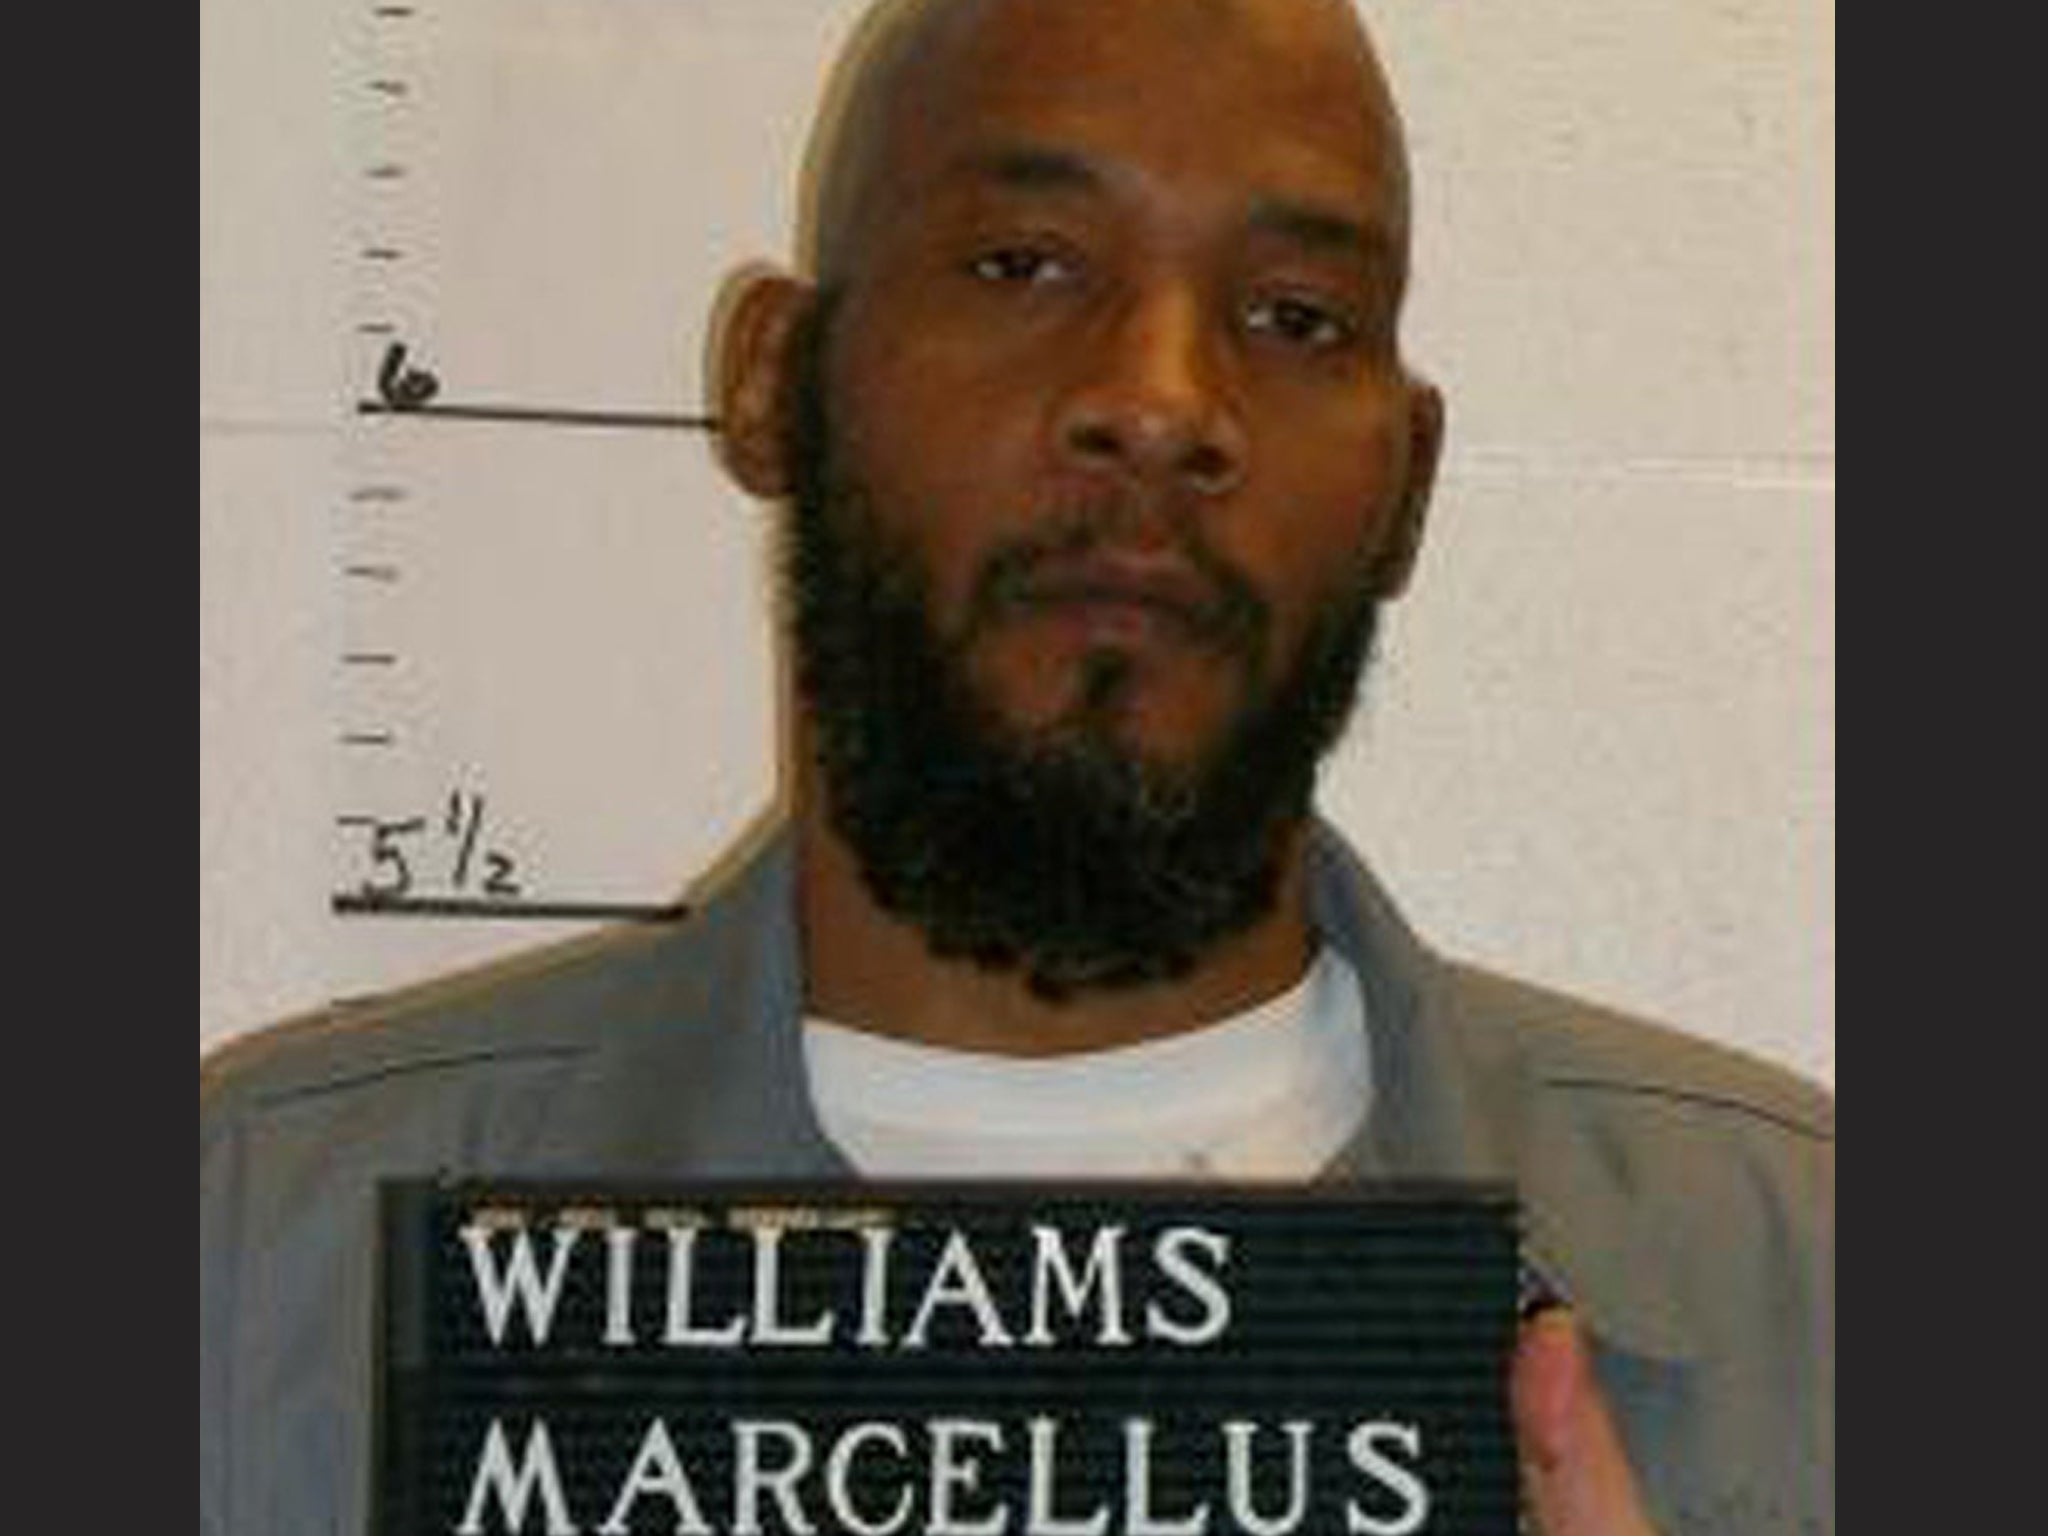 Marcellus Williams was convicted on the basis of evidence from two witnesses who his lawyers say are unreliable